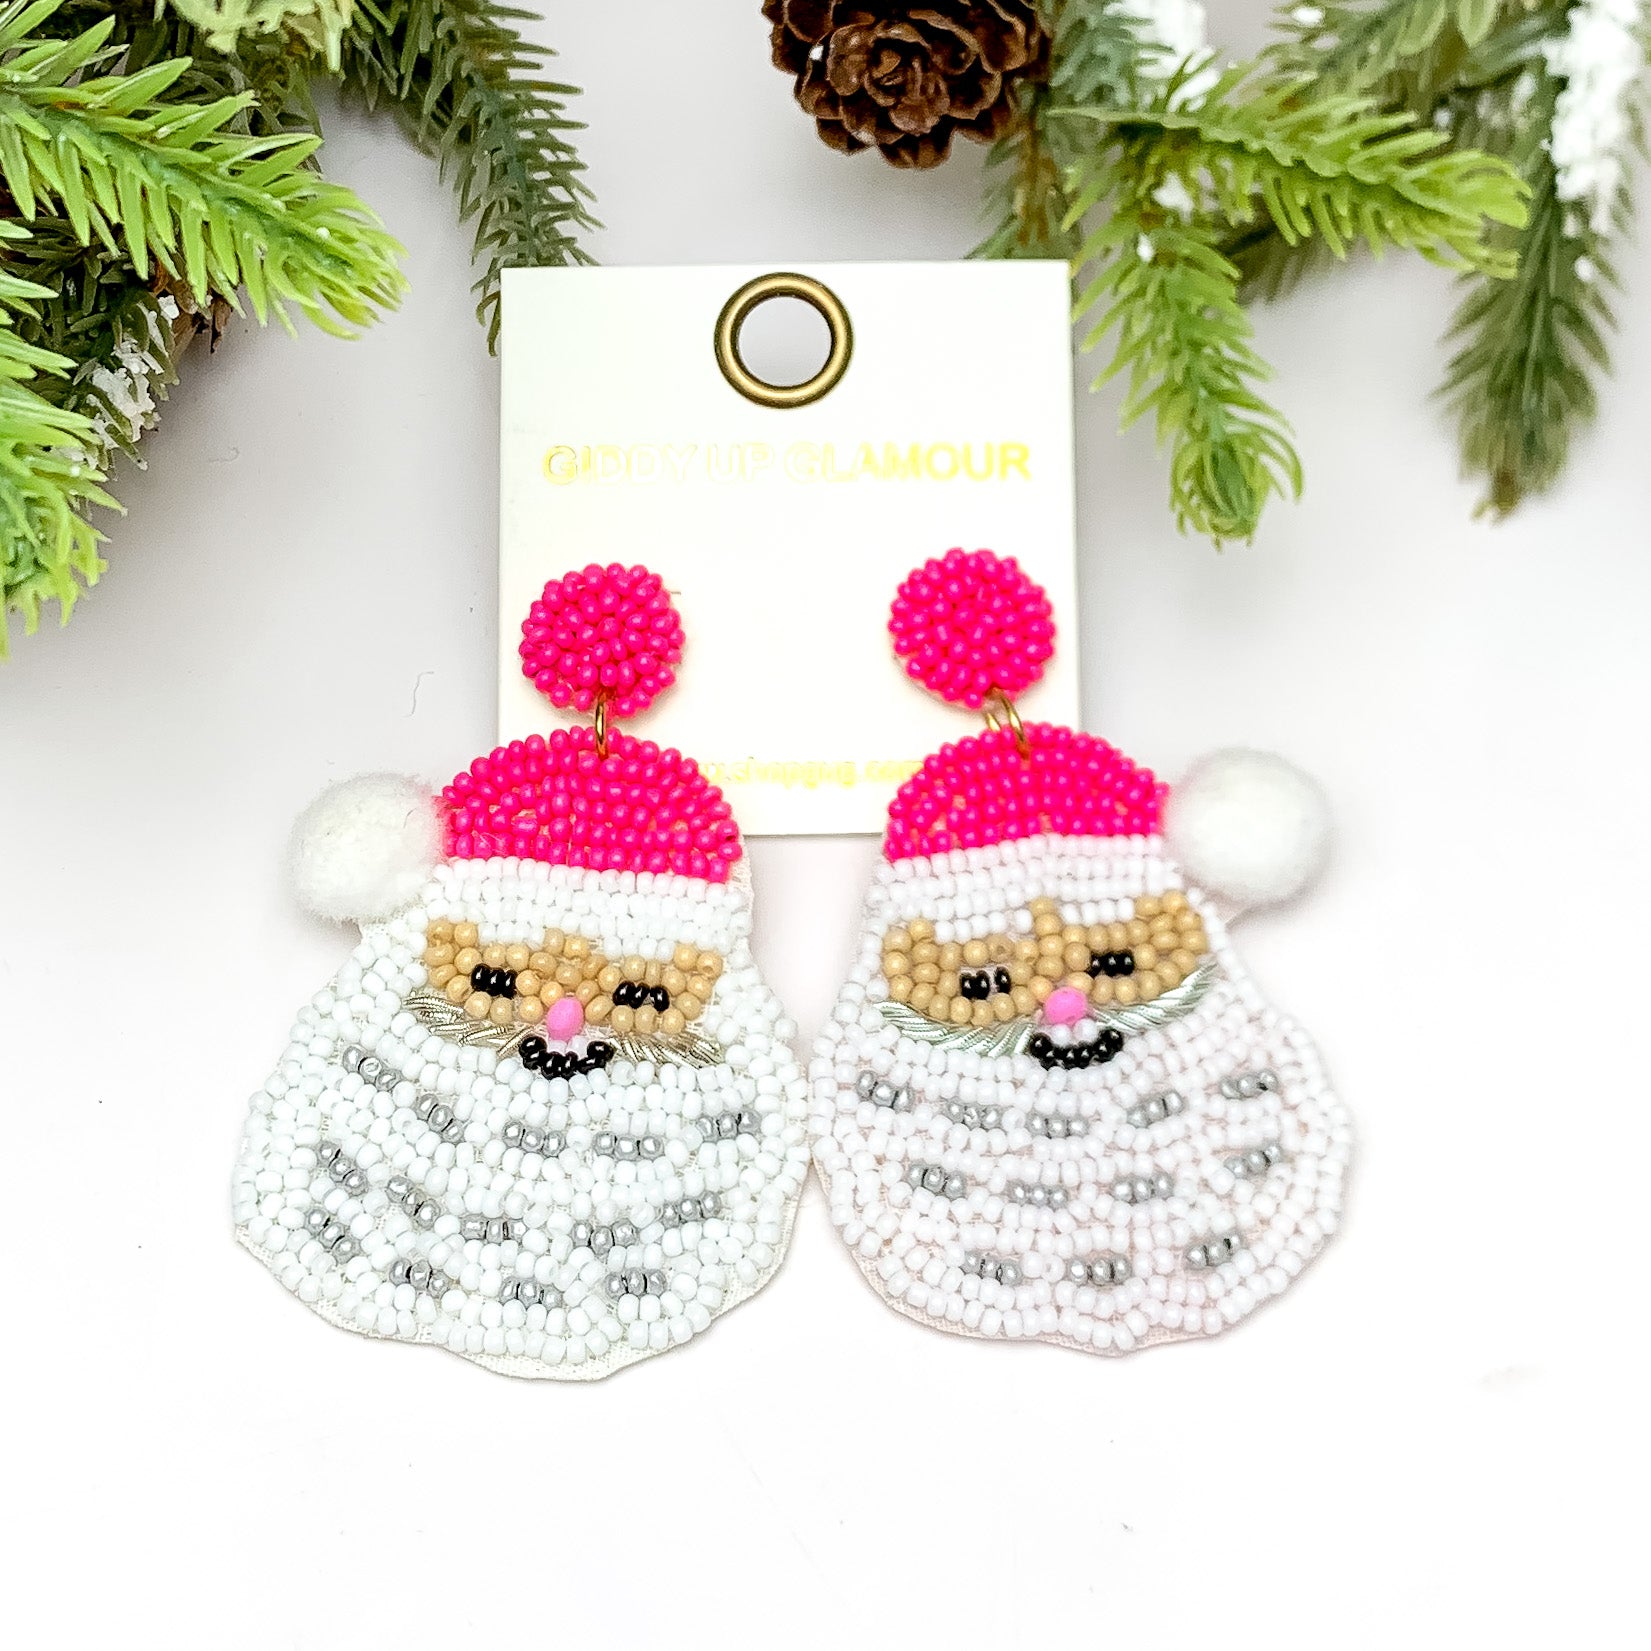 Pretty in Pink Santa Beaded Earrings. These earrings are pictured on a white background with a tree and pine cones at the top.